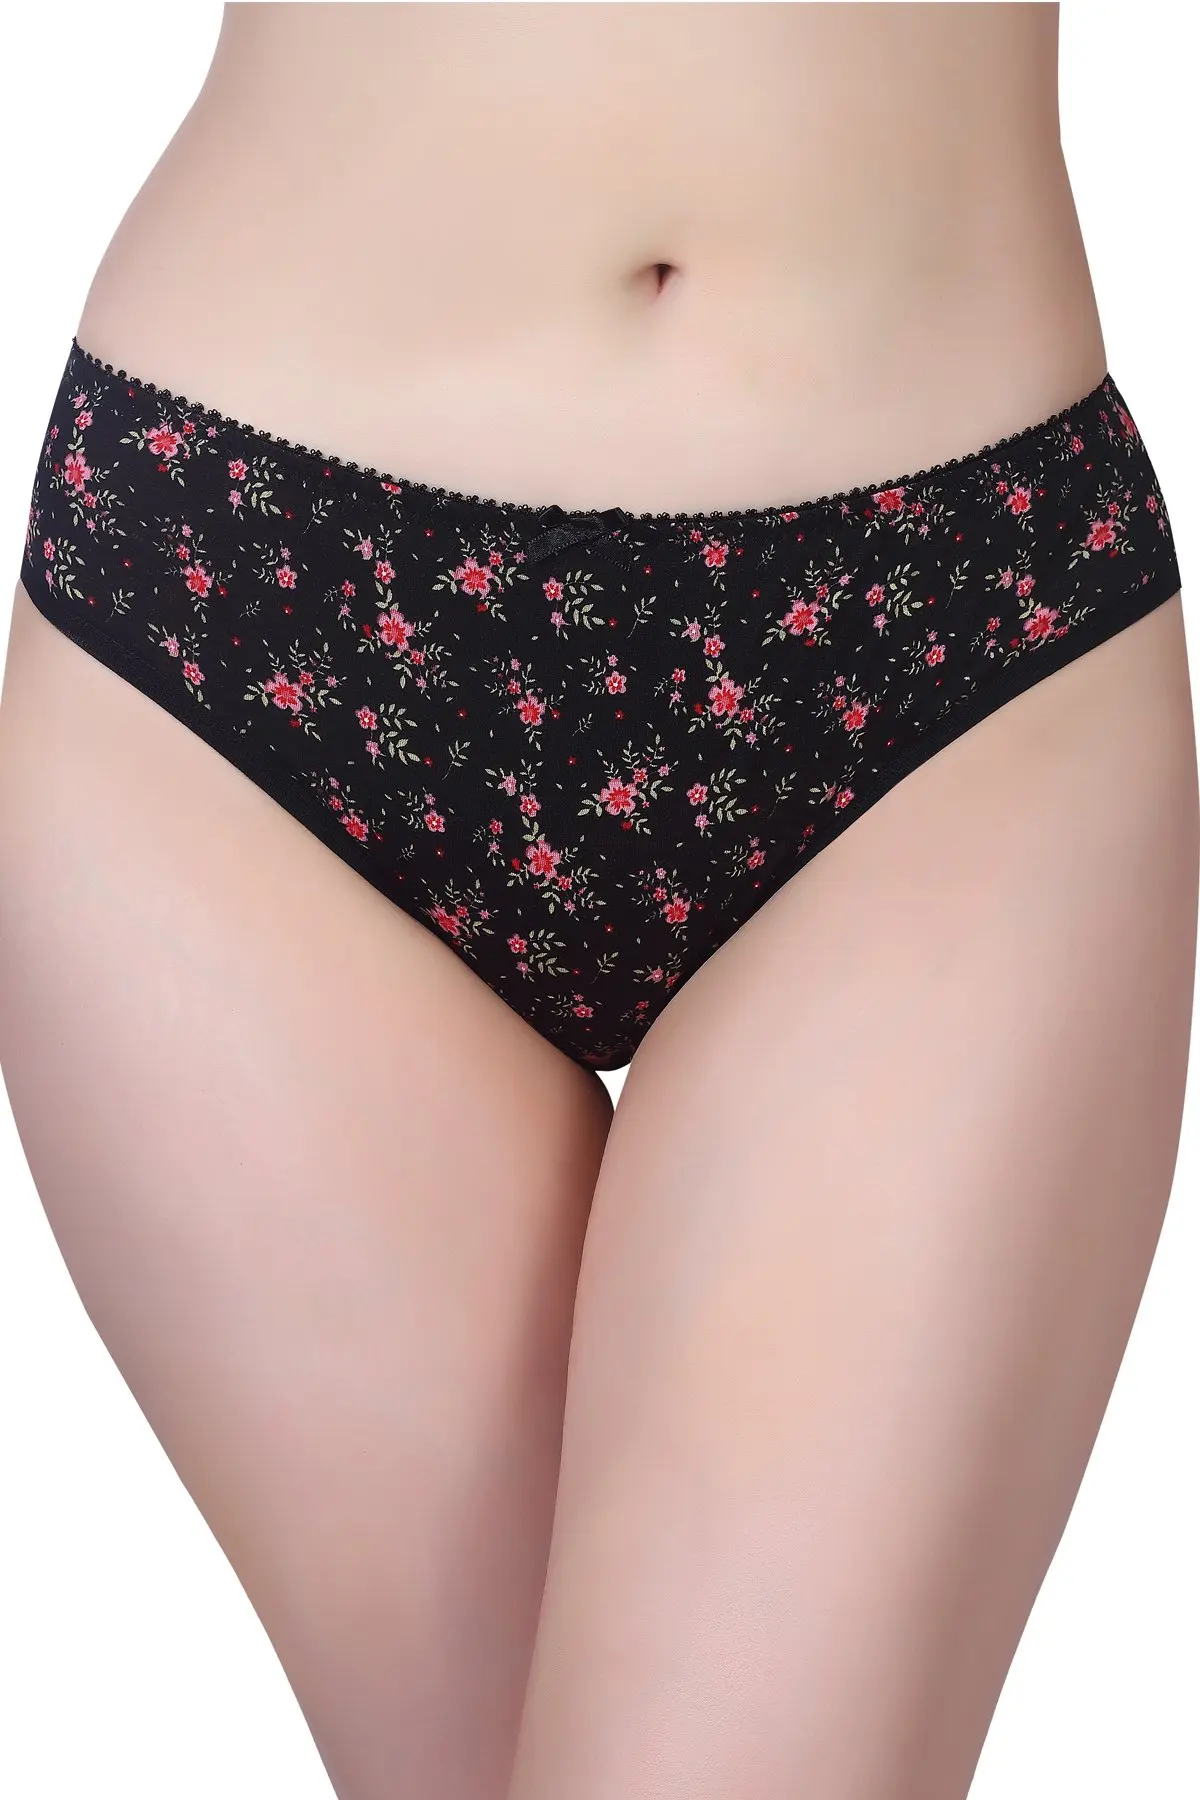 Floral Lace Seamless Low Waist Panties, Lingerie, Panties Free Delivery  India.